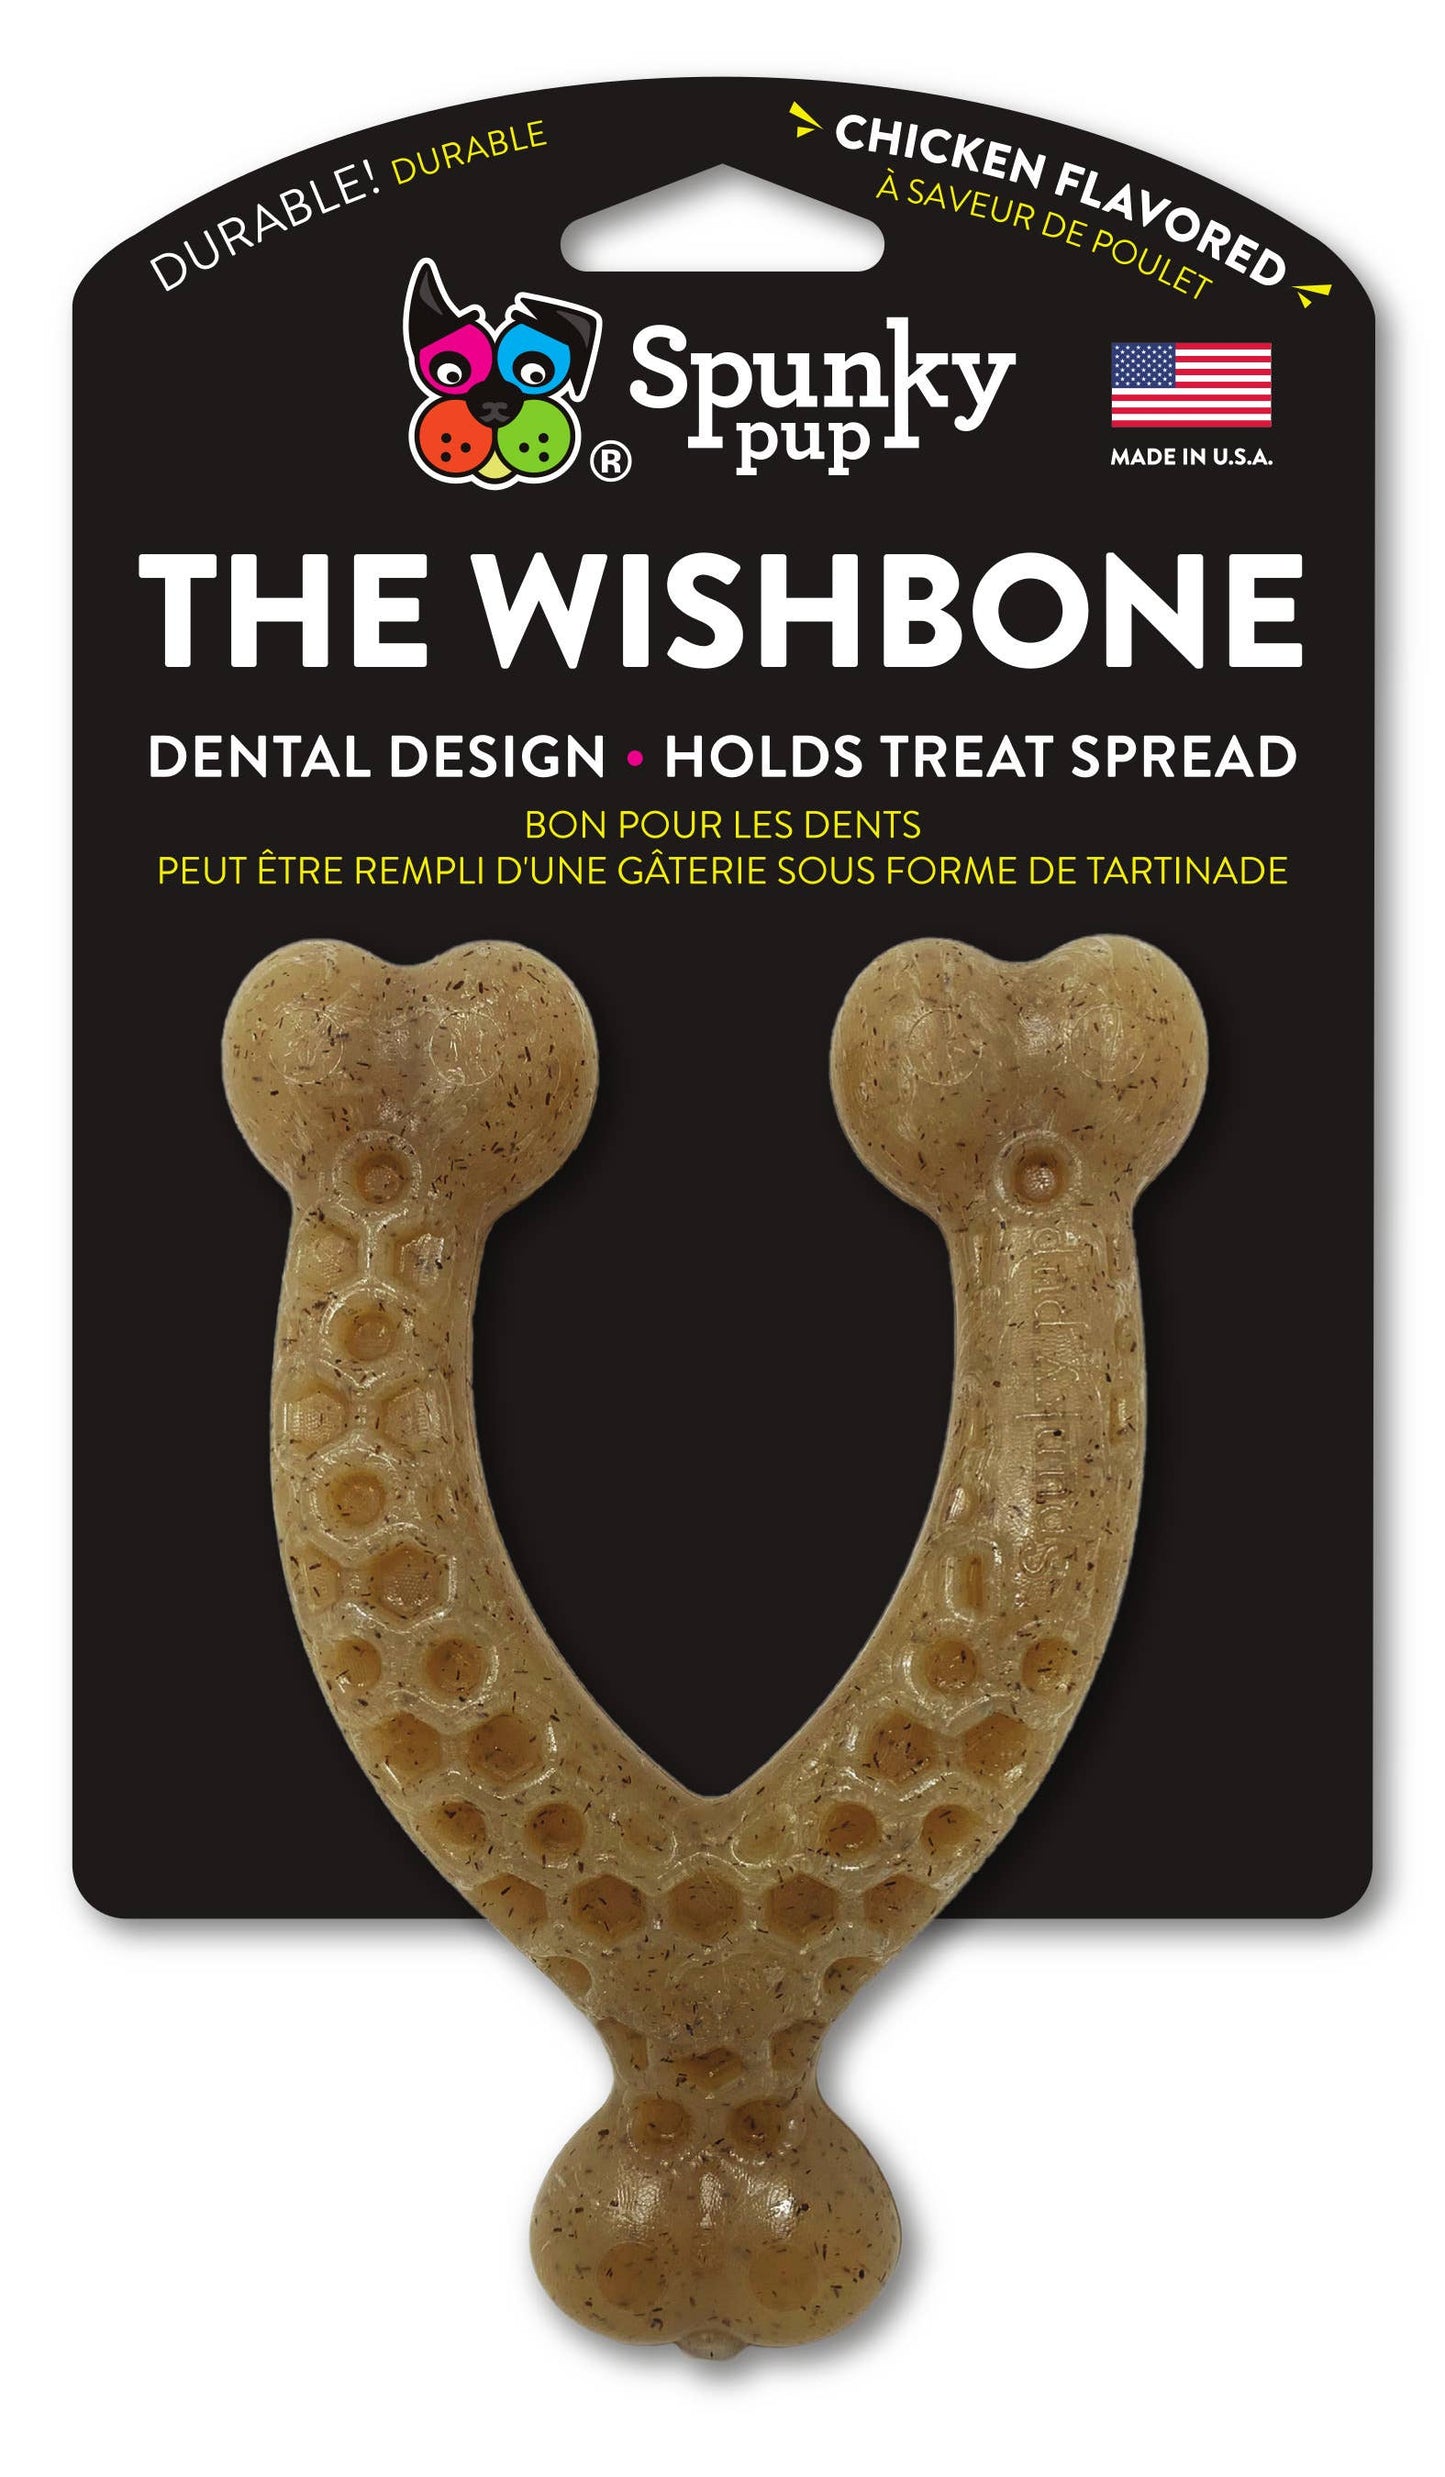 The Wishbone - MADE IN THE USA: Small